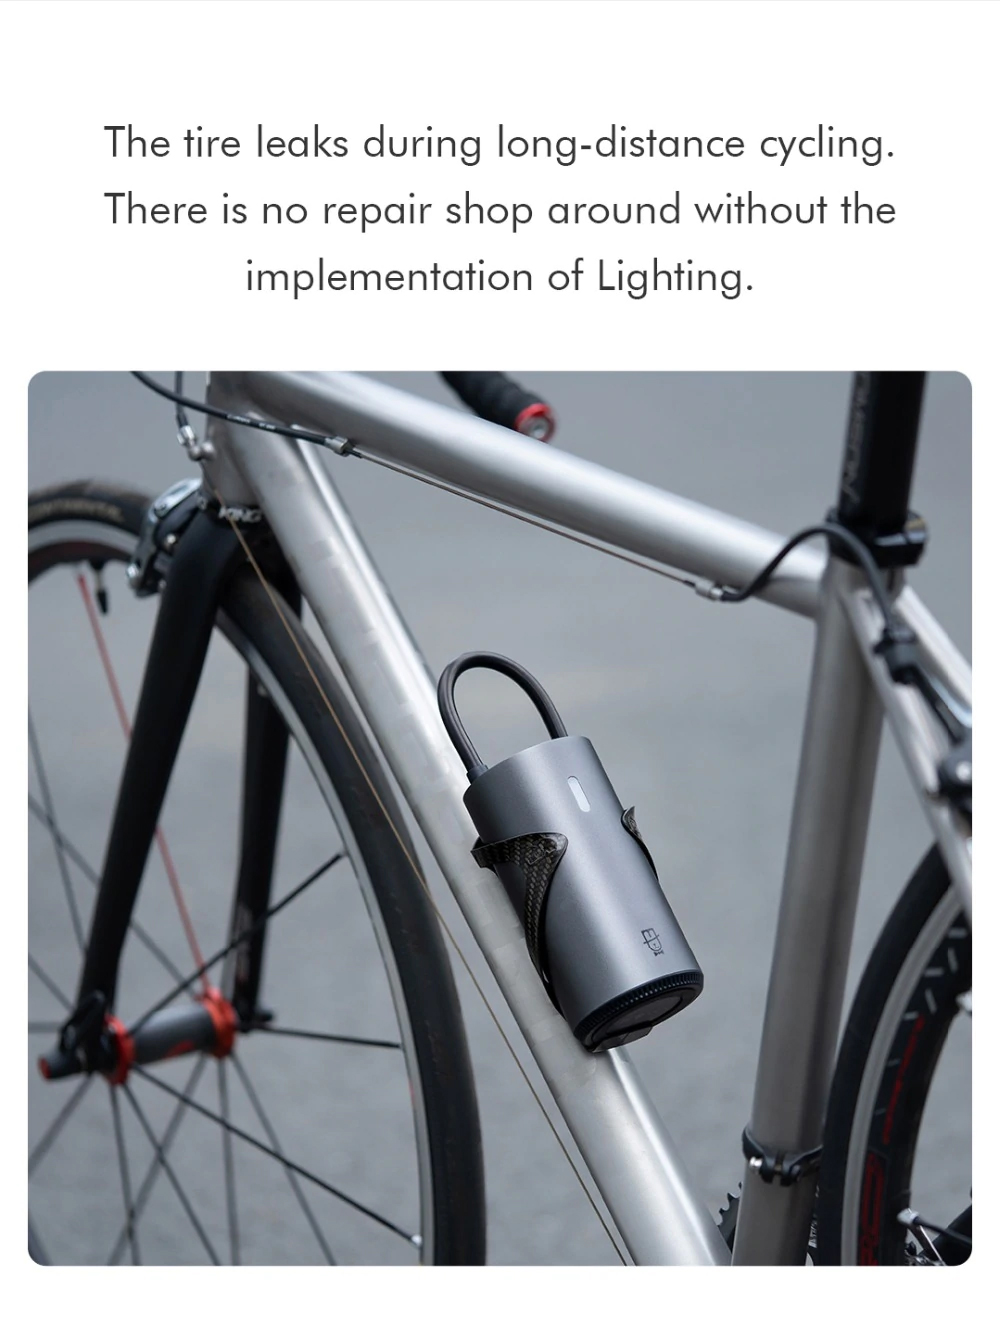 The tire leaks during long-distance cycling. There is no repair shop around without the implementation of Lighting.